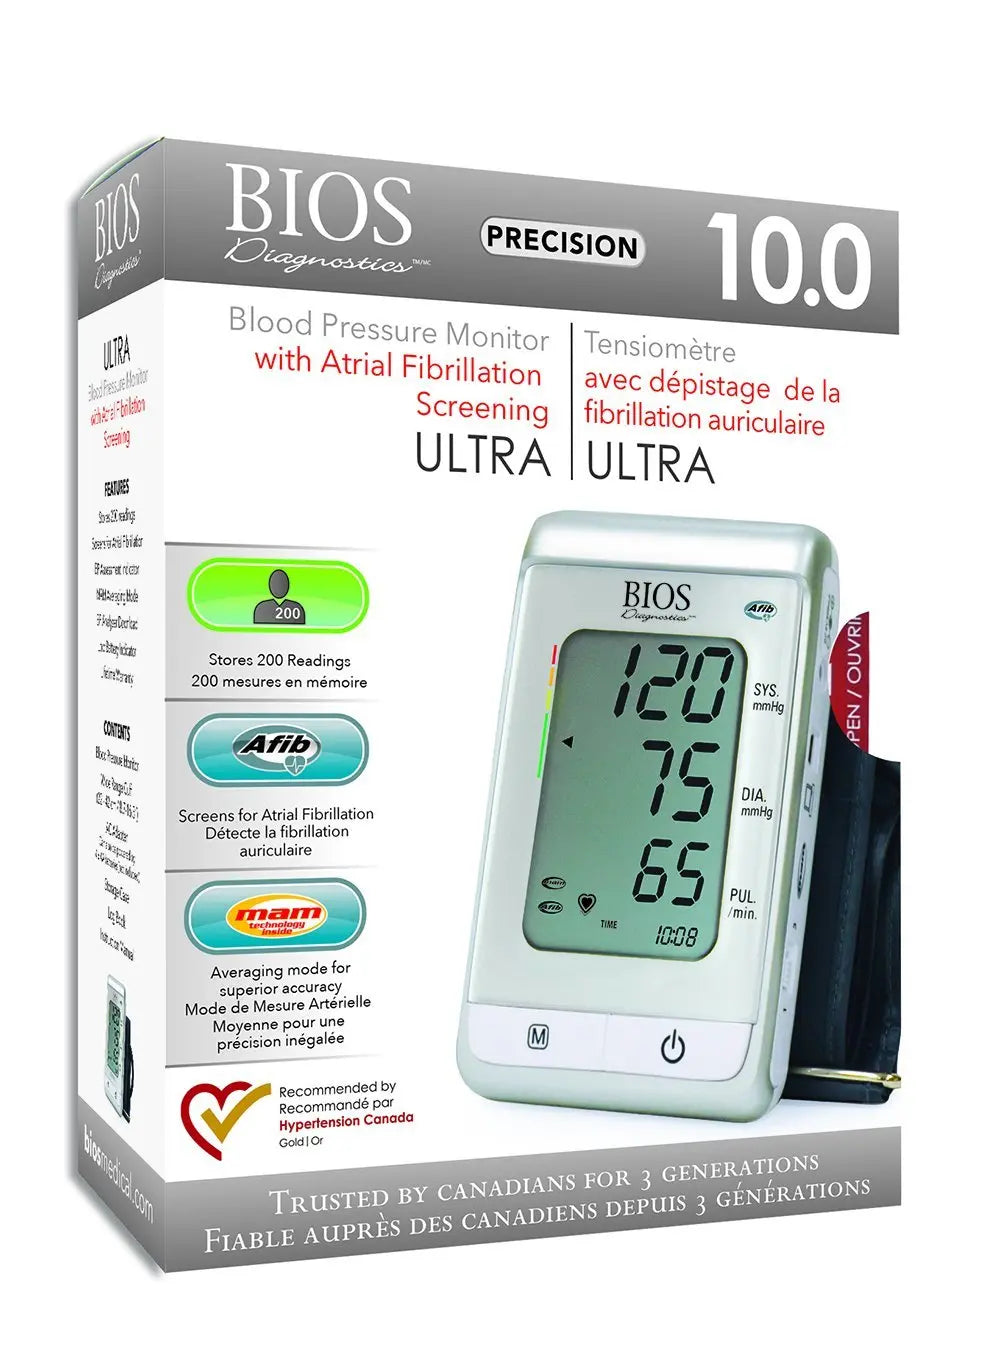 BIOS 3MS1-4Y EA/1 BIOS ULTRA BLOOD PRESSURE MONITOR WITH AFIB SCREENING (PRECISION 10.0) COMPATIBLE WITH SMALL AND LARGE CUFF